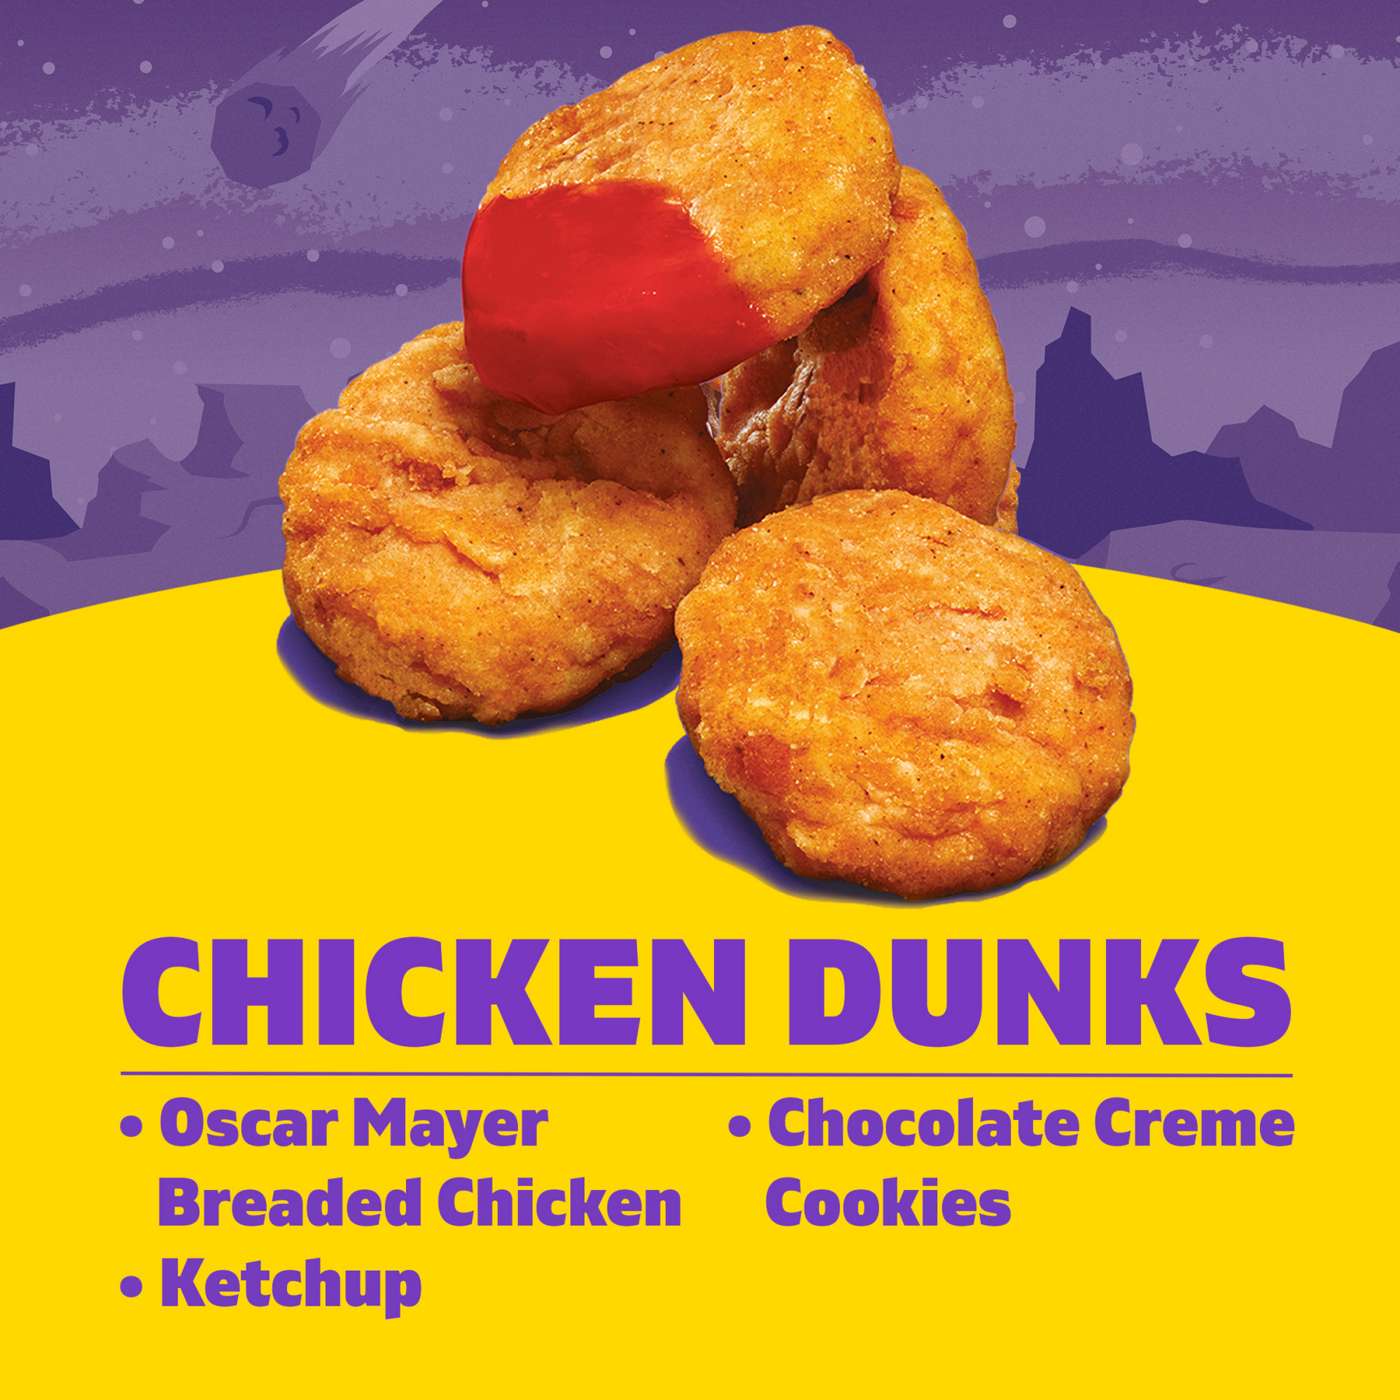 Lunchables Snack Kit Tray - Chicken Dunks with Chocolate Creme Cookies; image 5 of 6